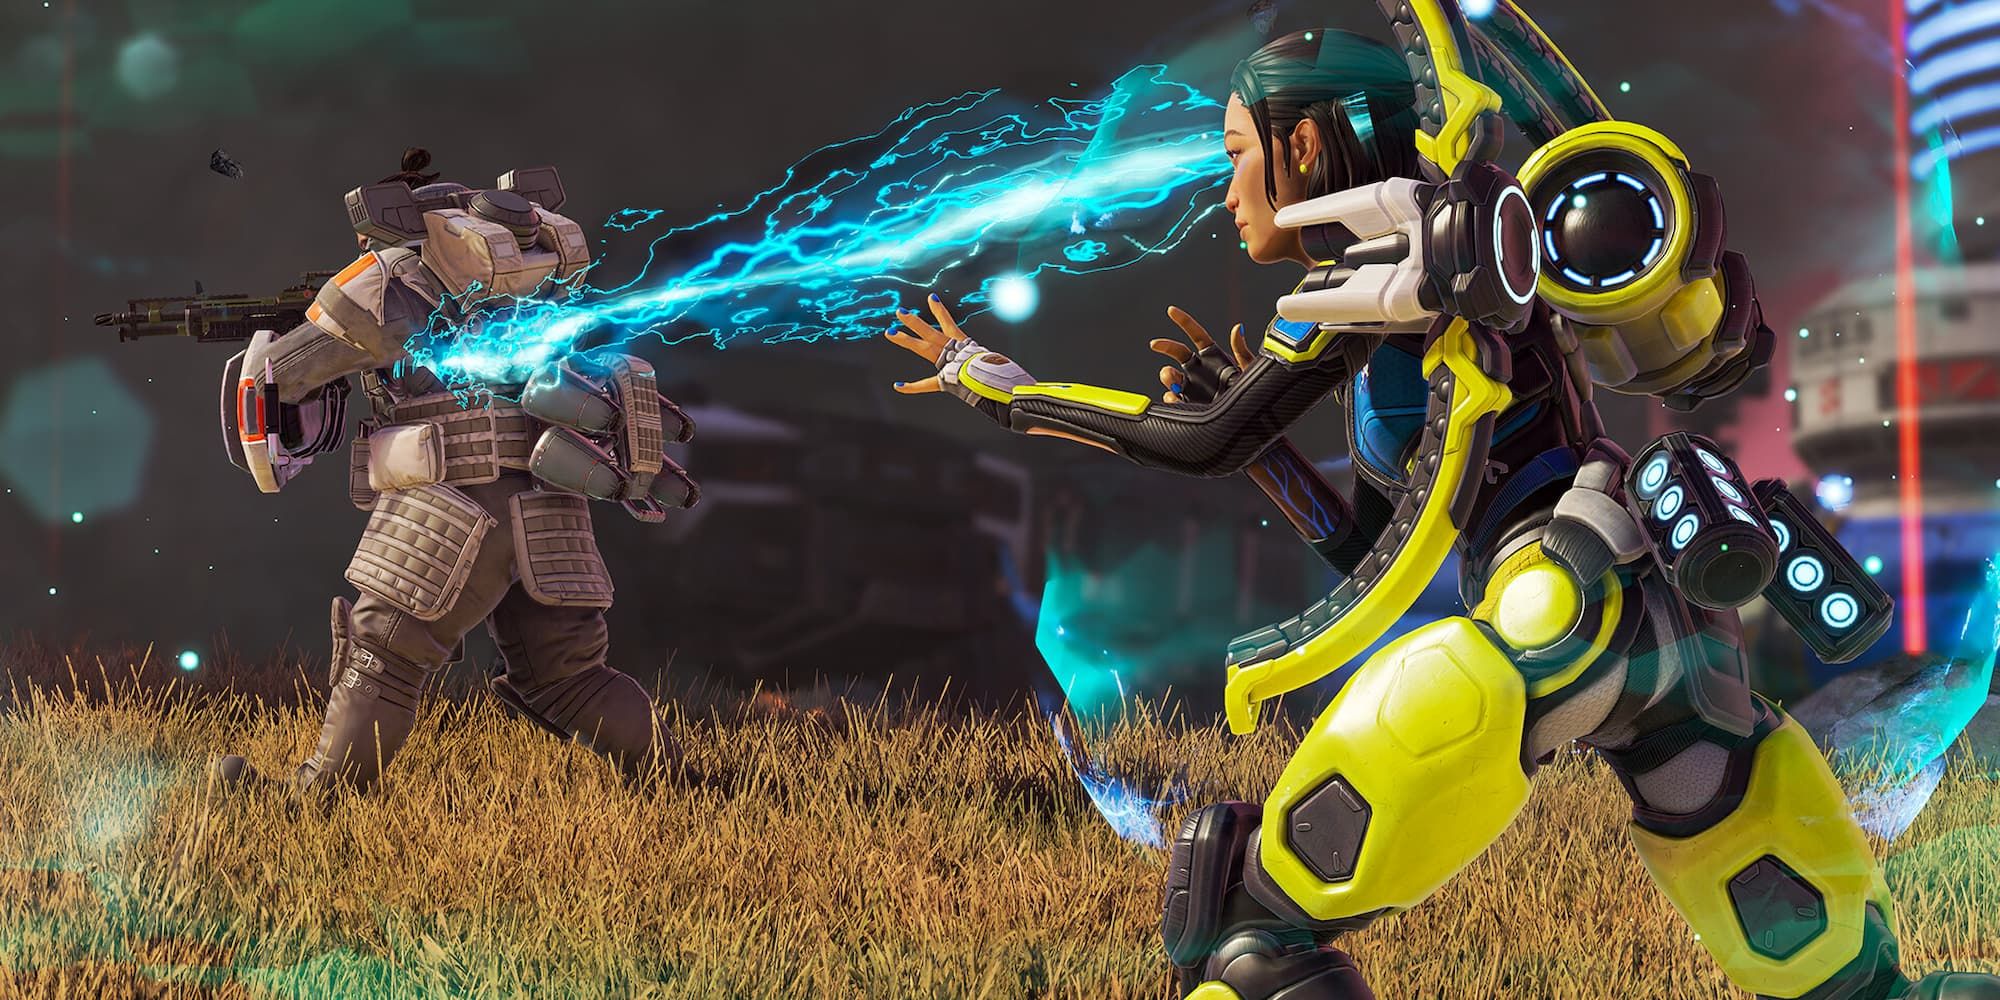 Apex Legends Coming to Steam and Nintendo Switch with Cross-Play